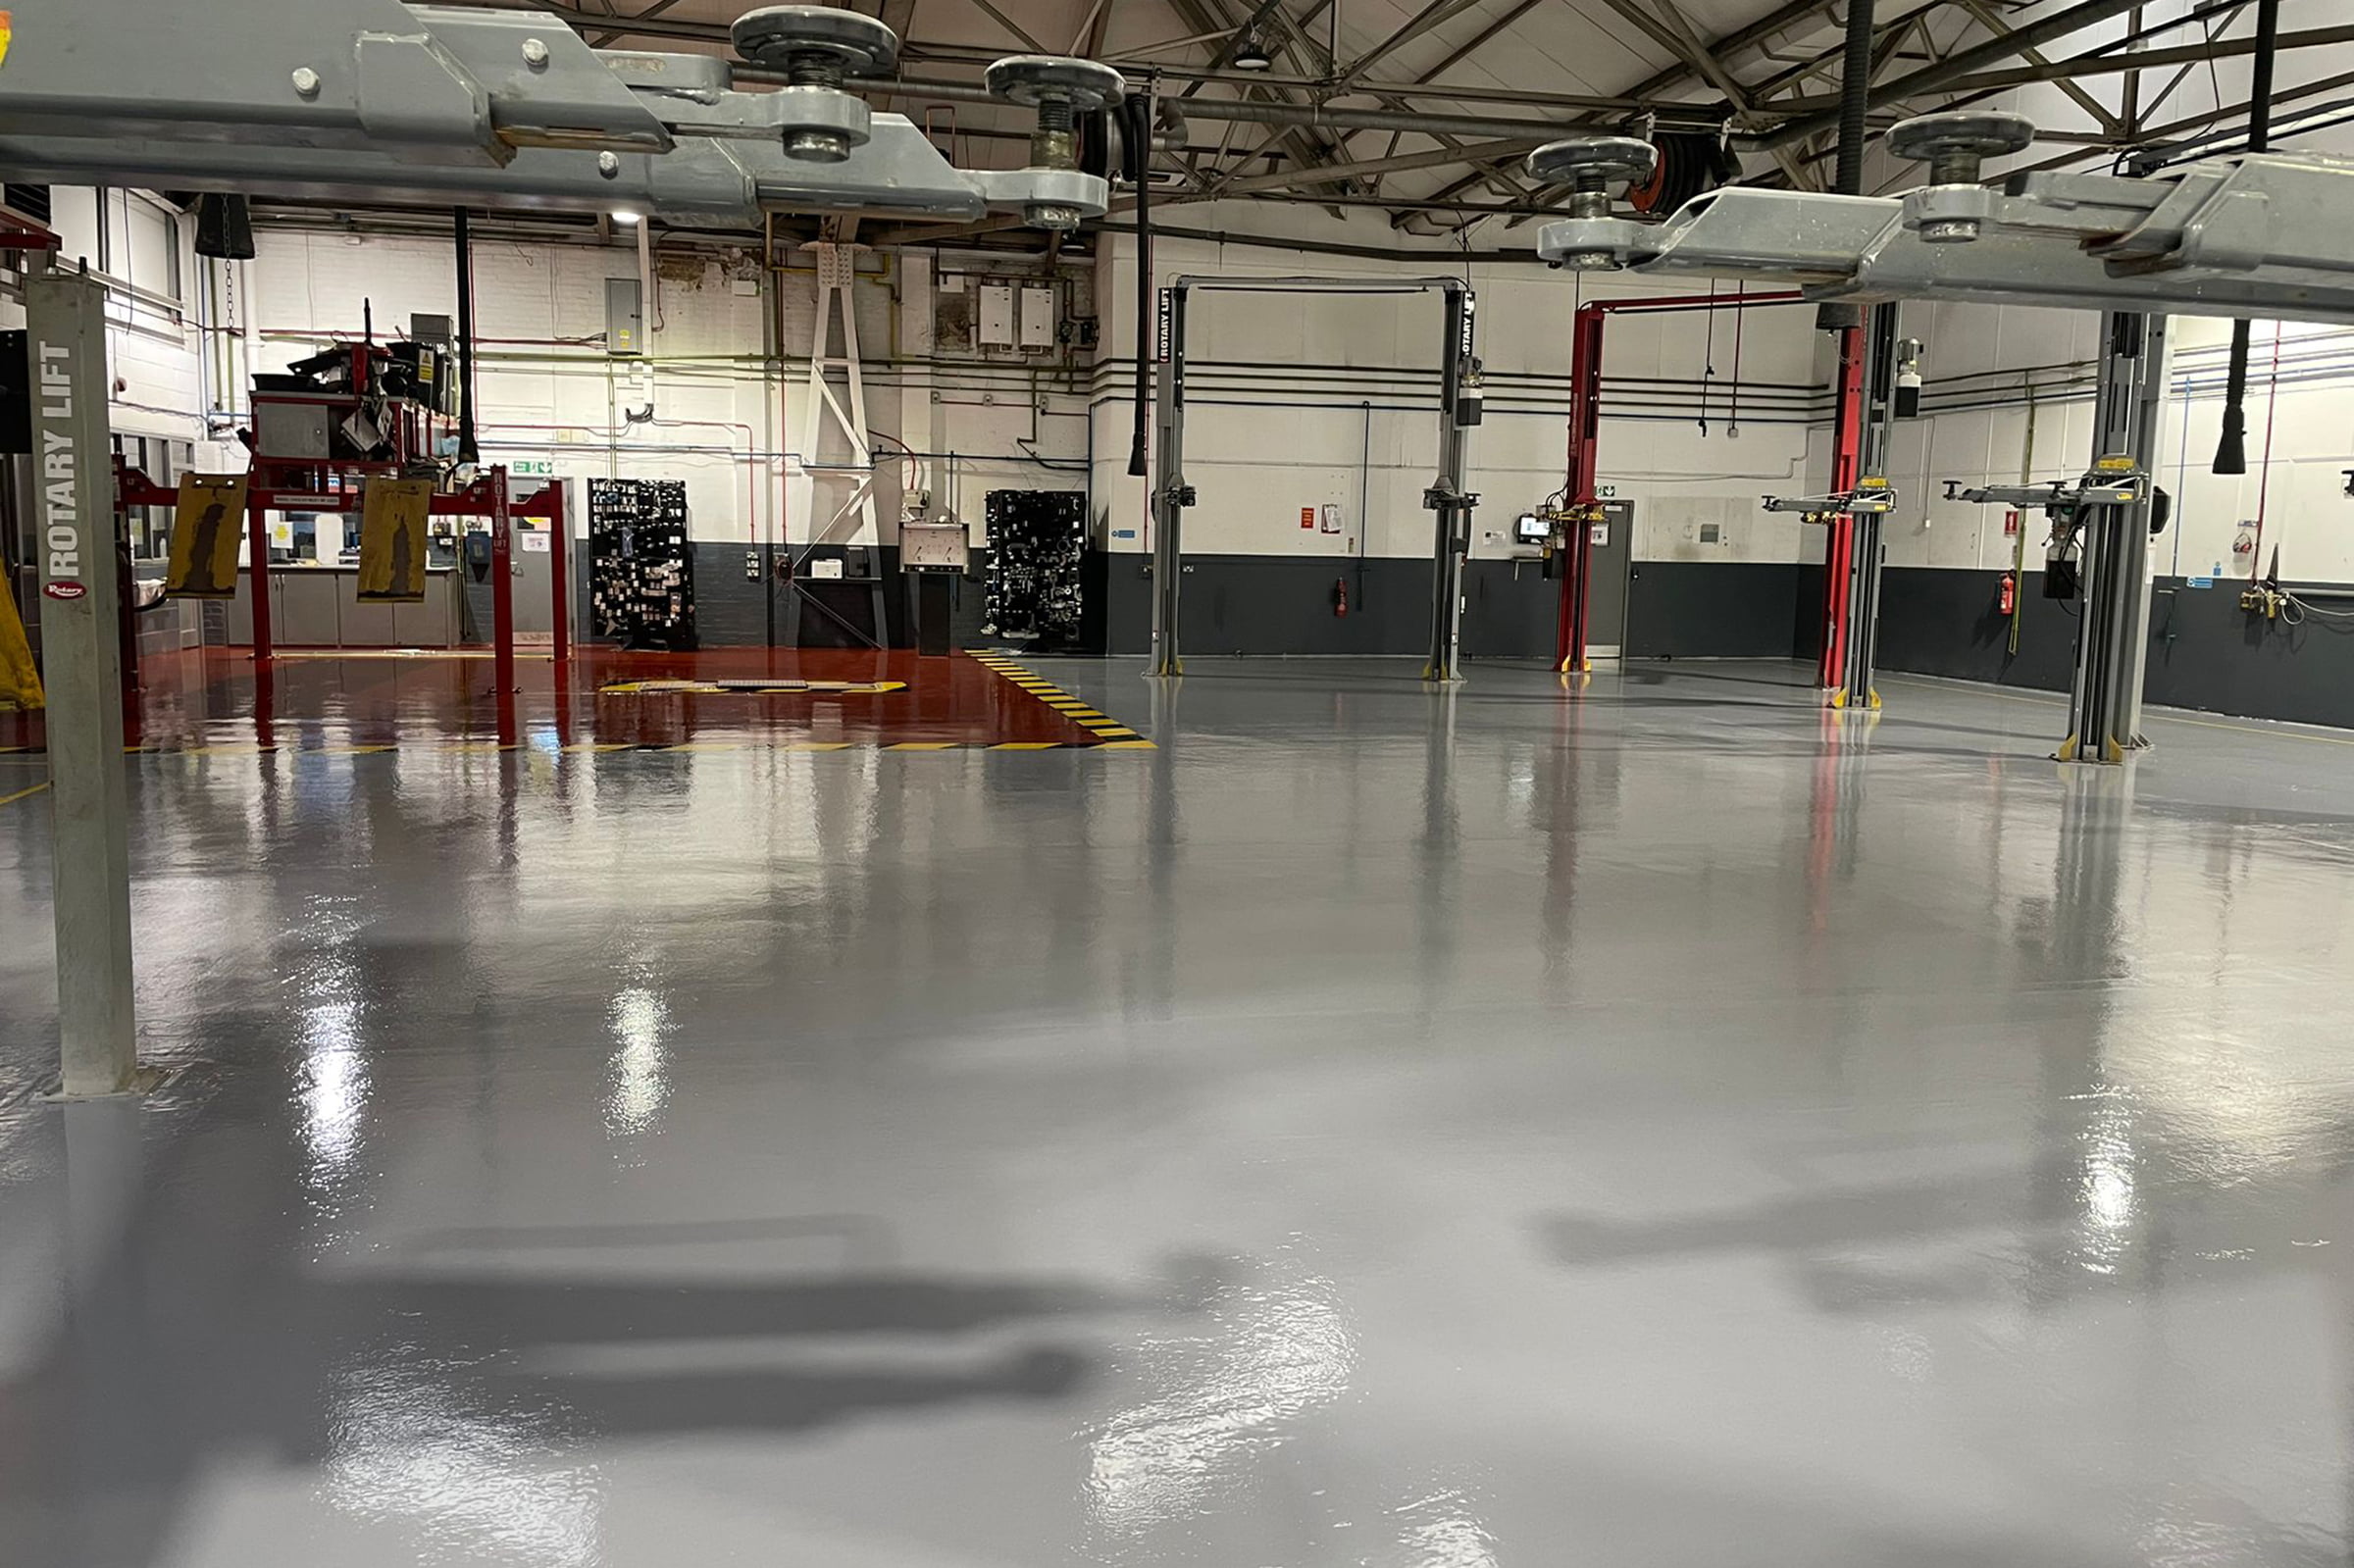 Finished garage workshop floor, using epoxy resin. Red for the majority of the surface and red for the MOT bay